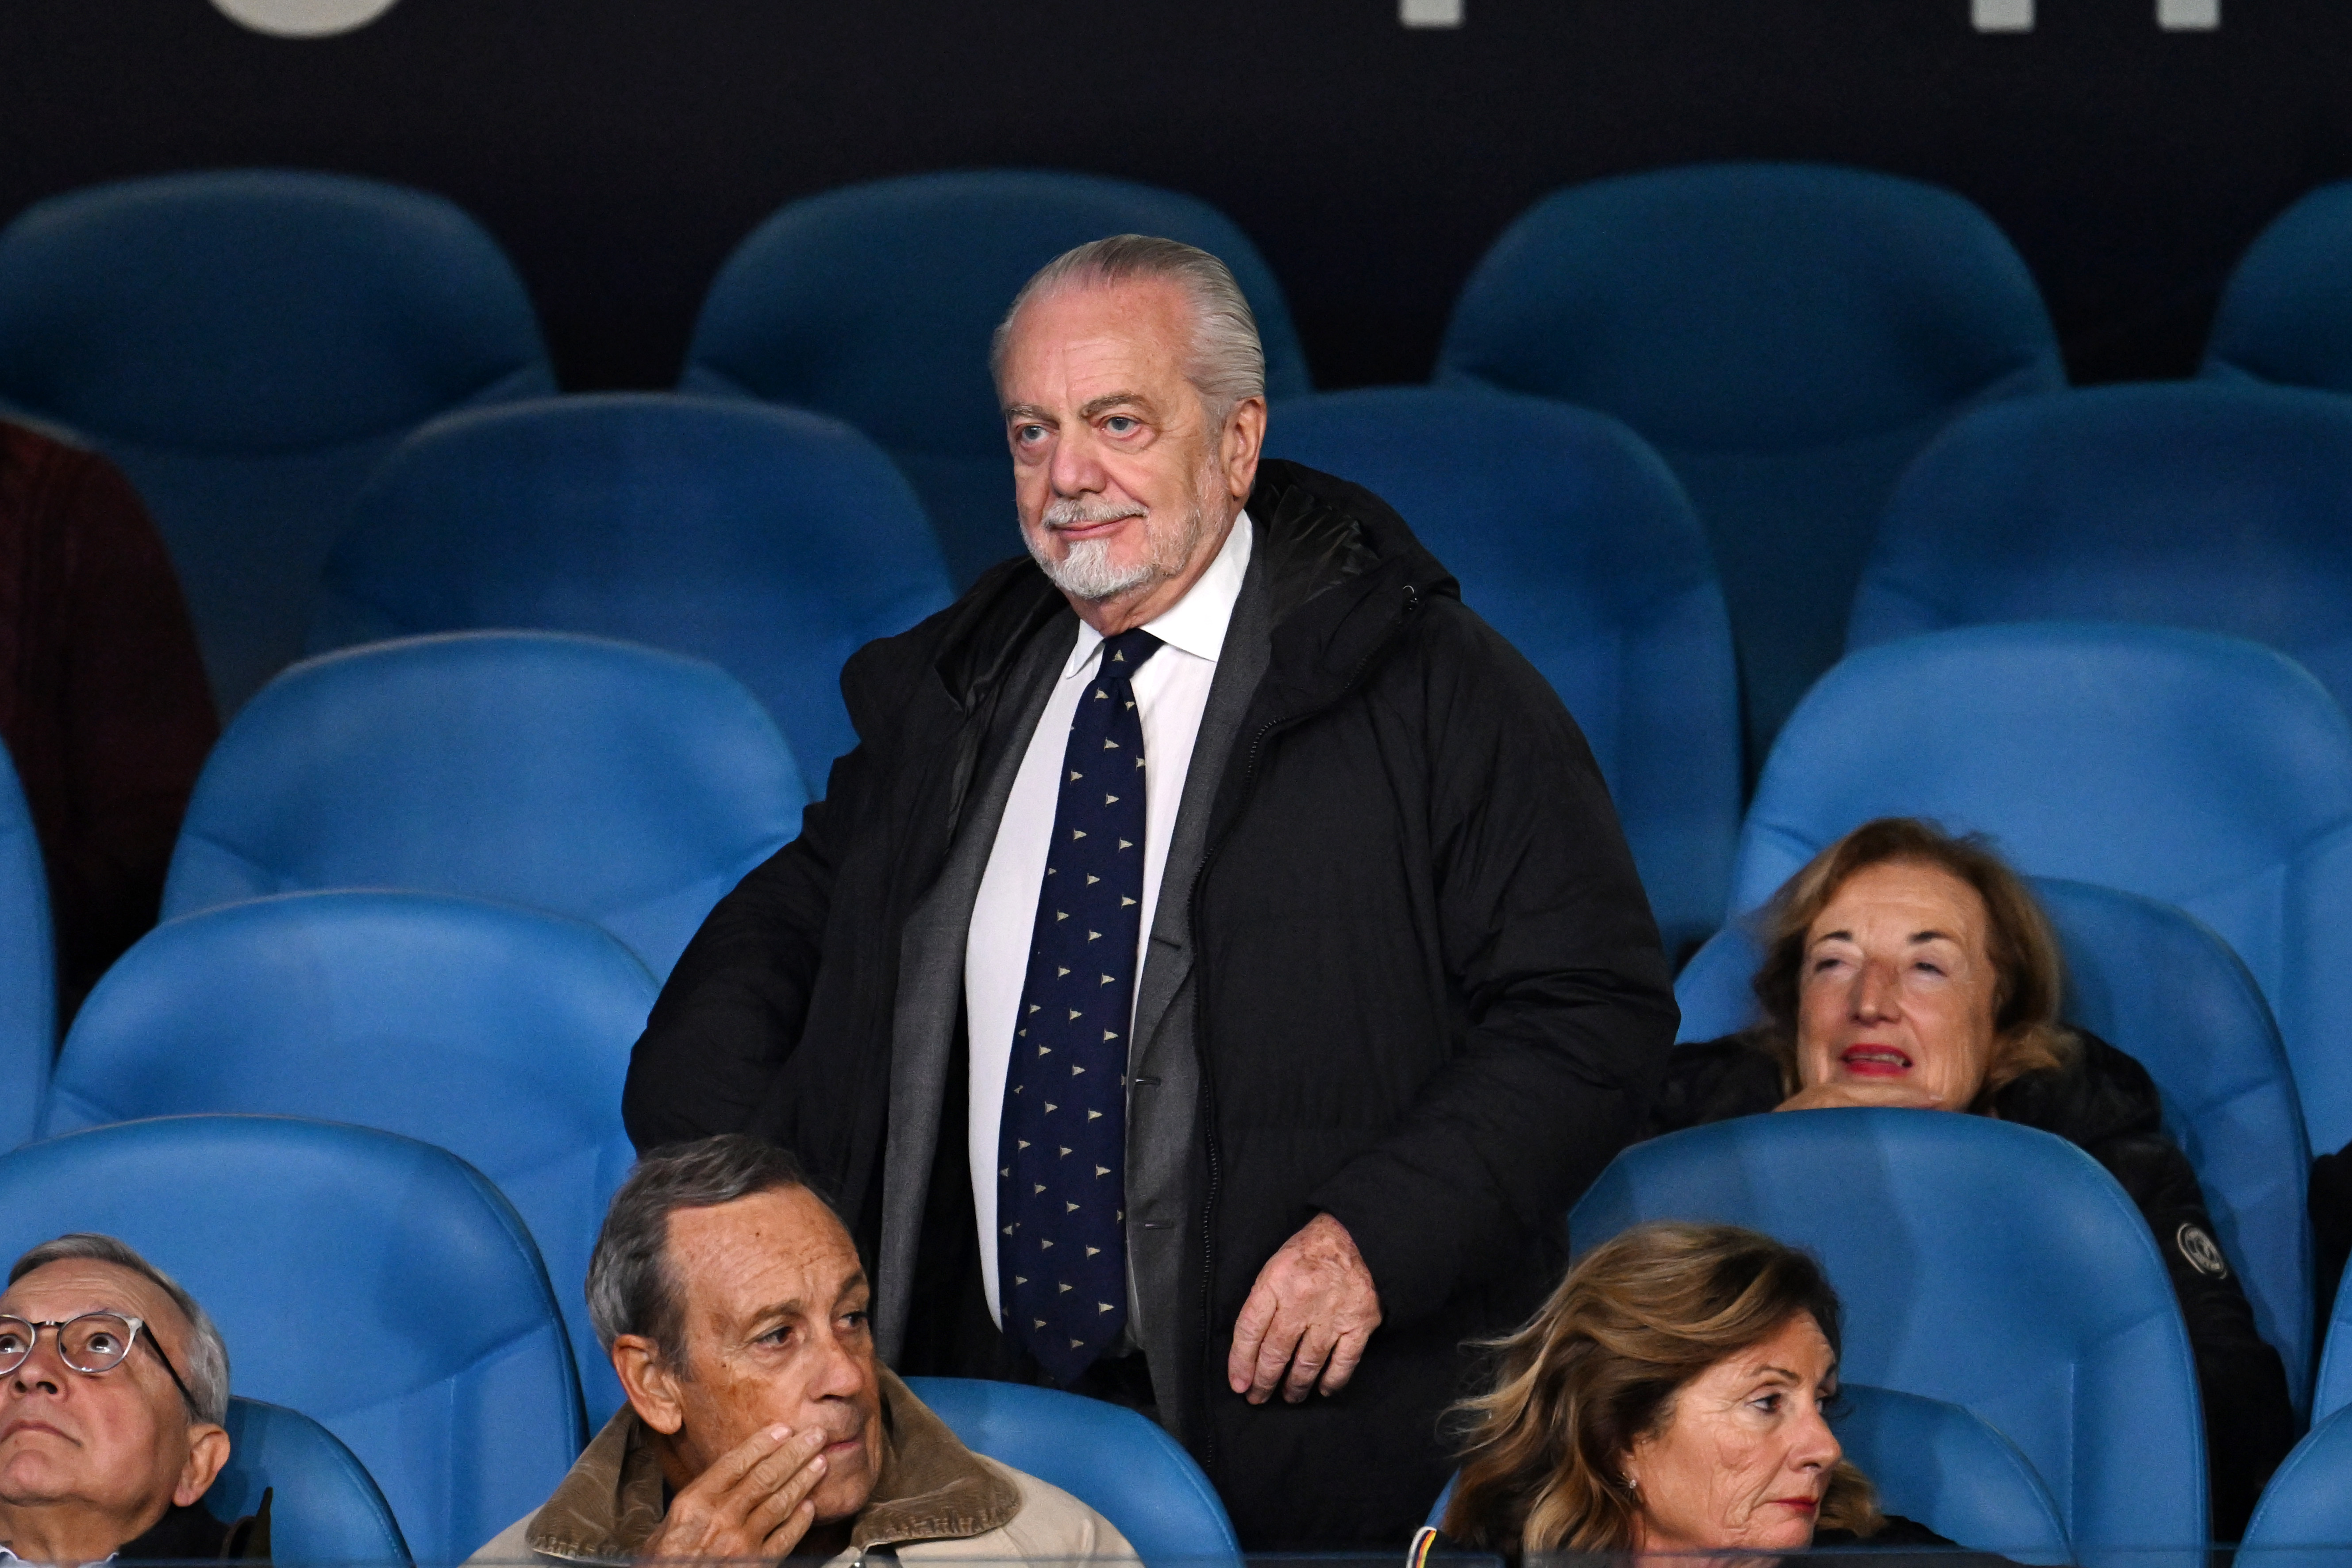 Official SSC Napoli on X: The thoughts of president Aurelio De Laurentiis  and everyone at SSC Napoli are with the family of our former coach Gianni  Di Marzio following his passing.  /